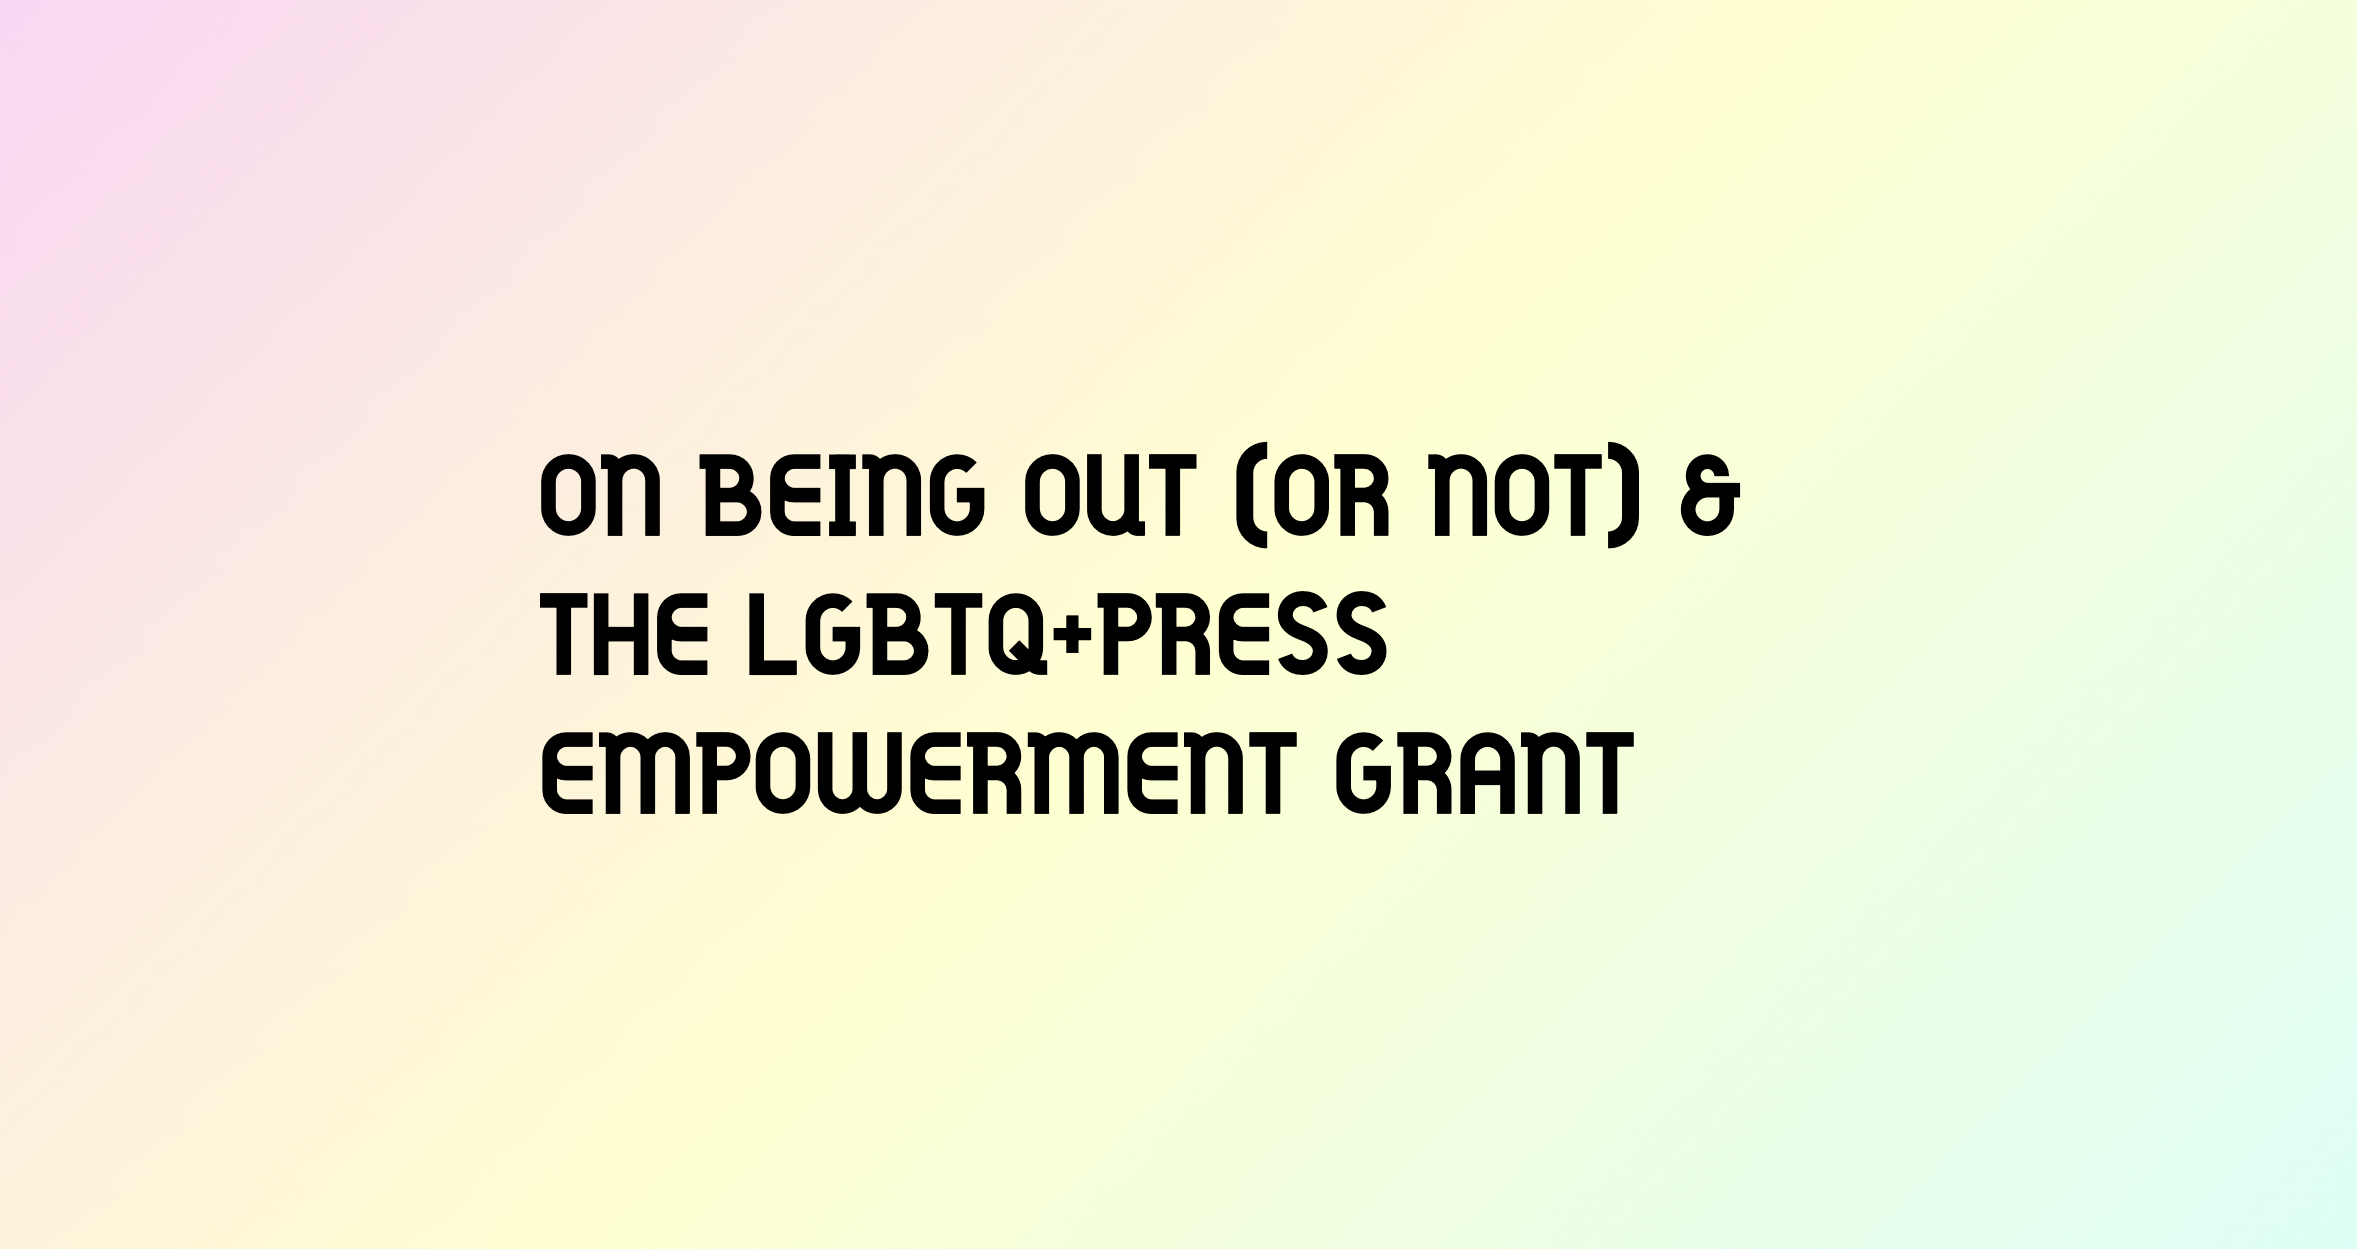 On being out (or not) & the LGBTQ+Press Empowerment Grant